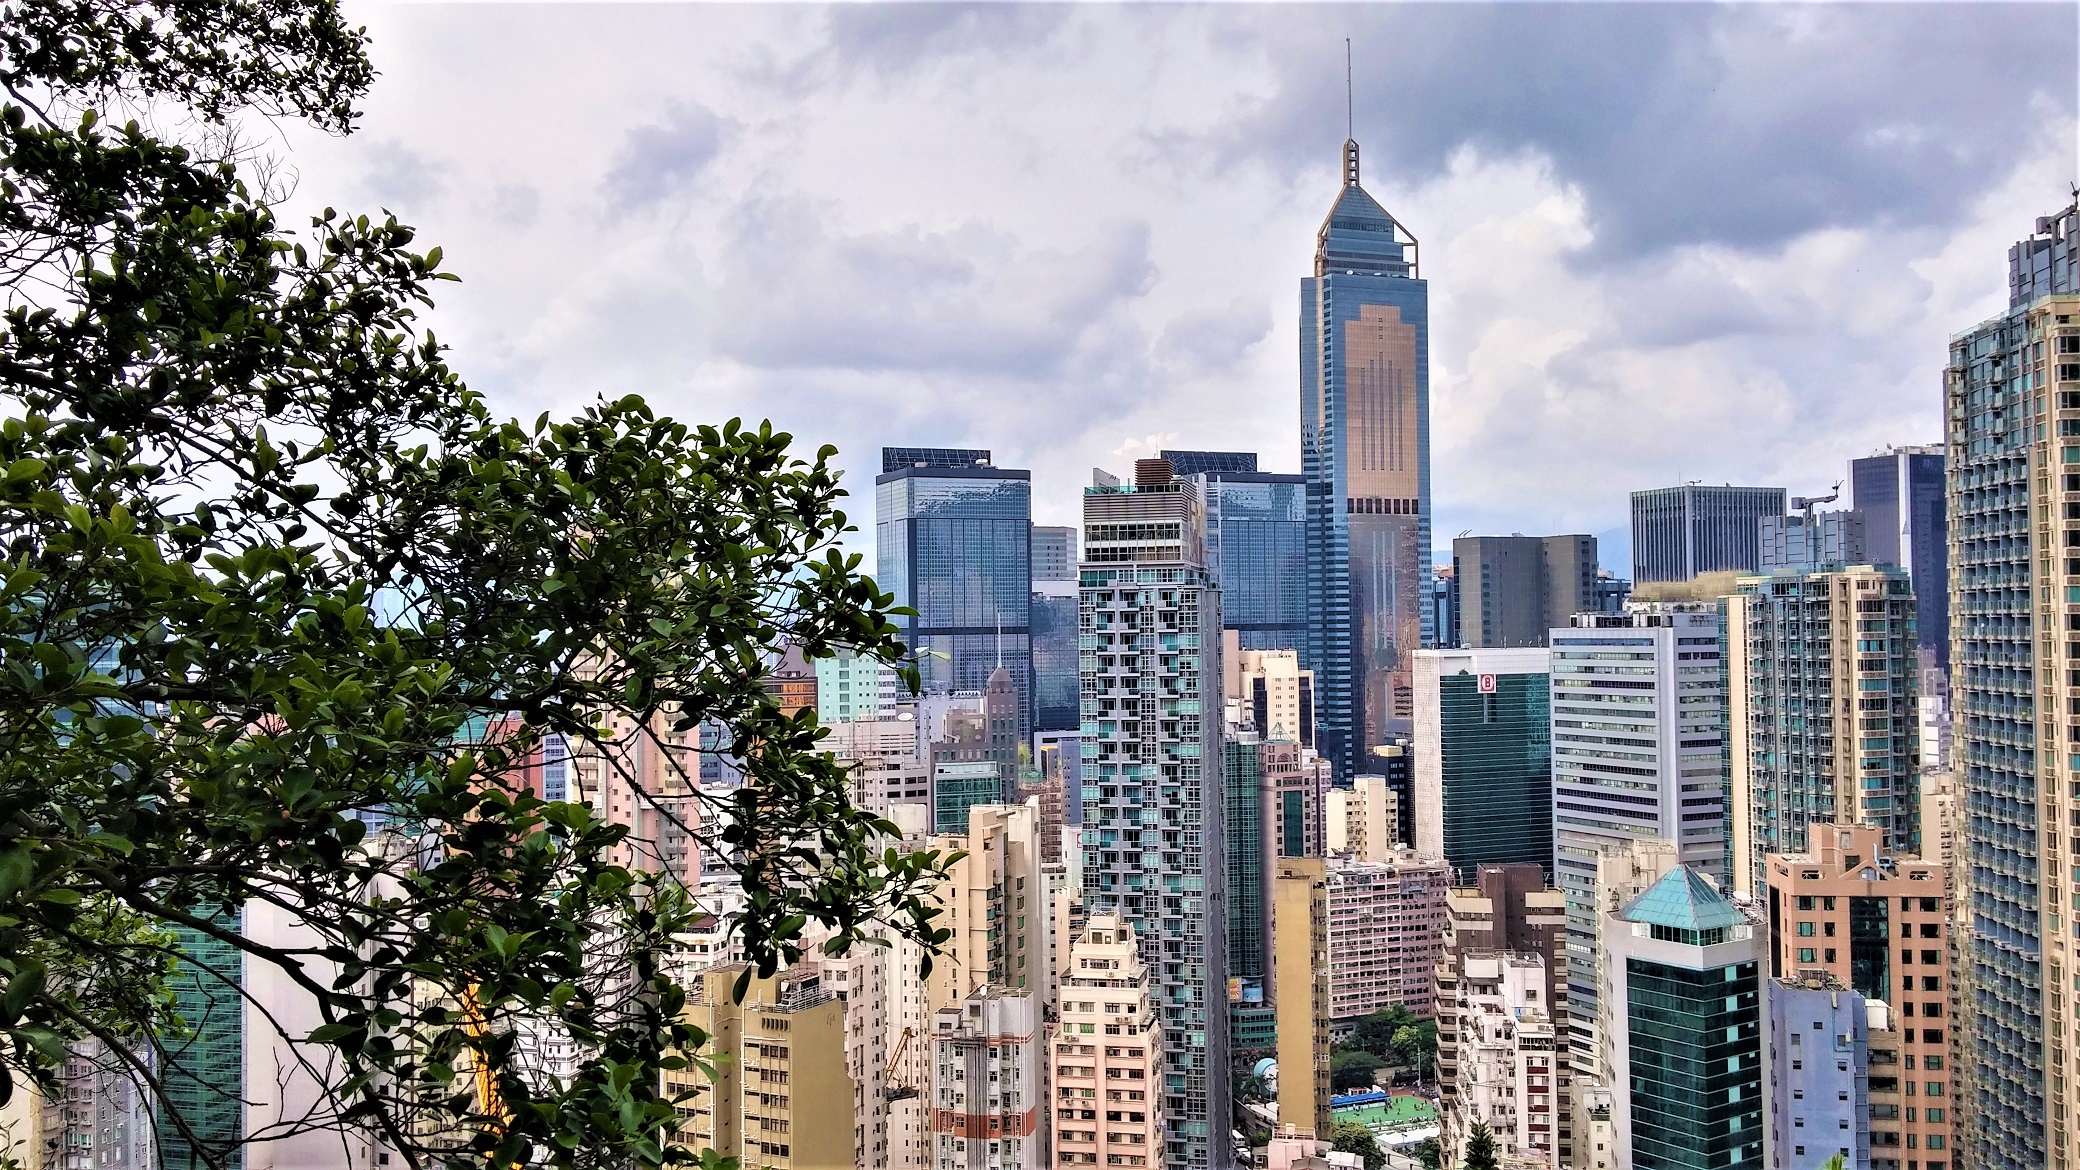 View of Wan Chai from Bowen Road today